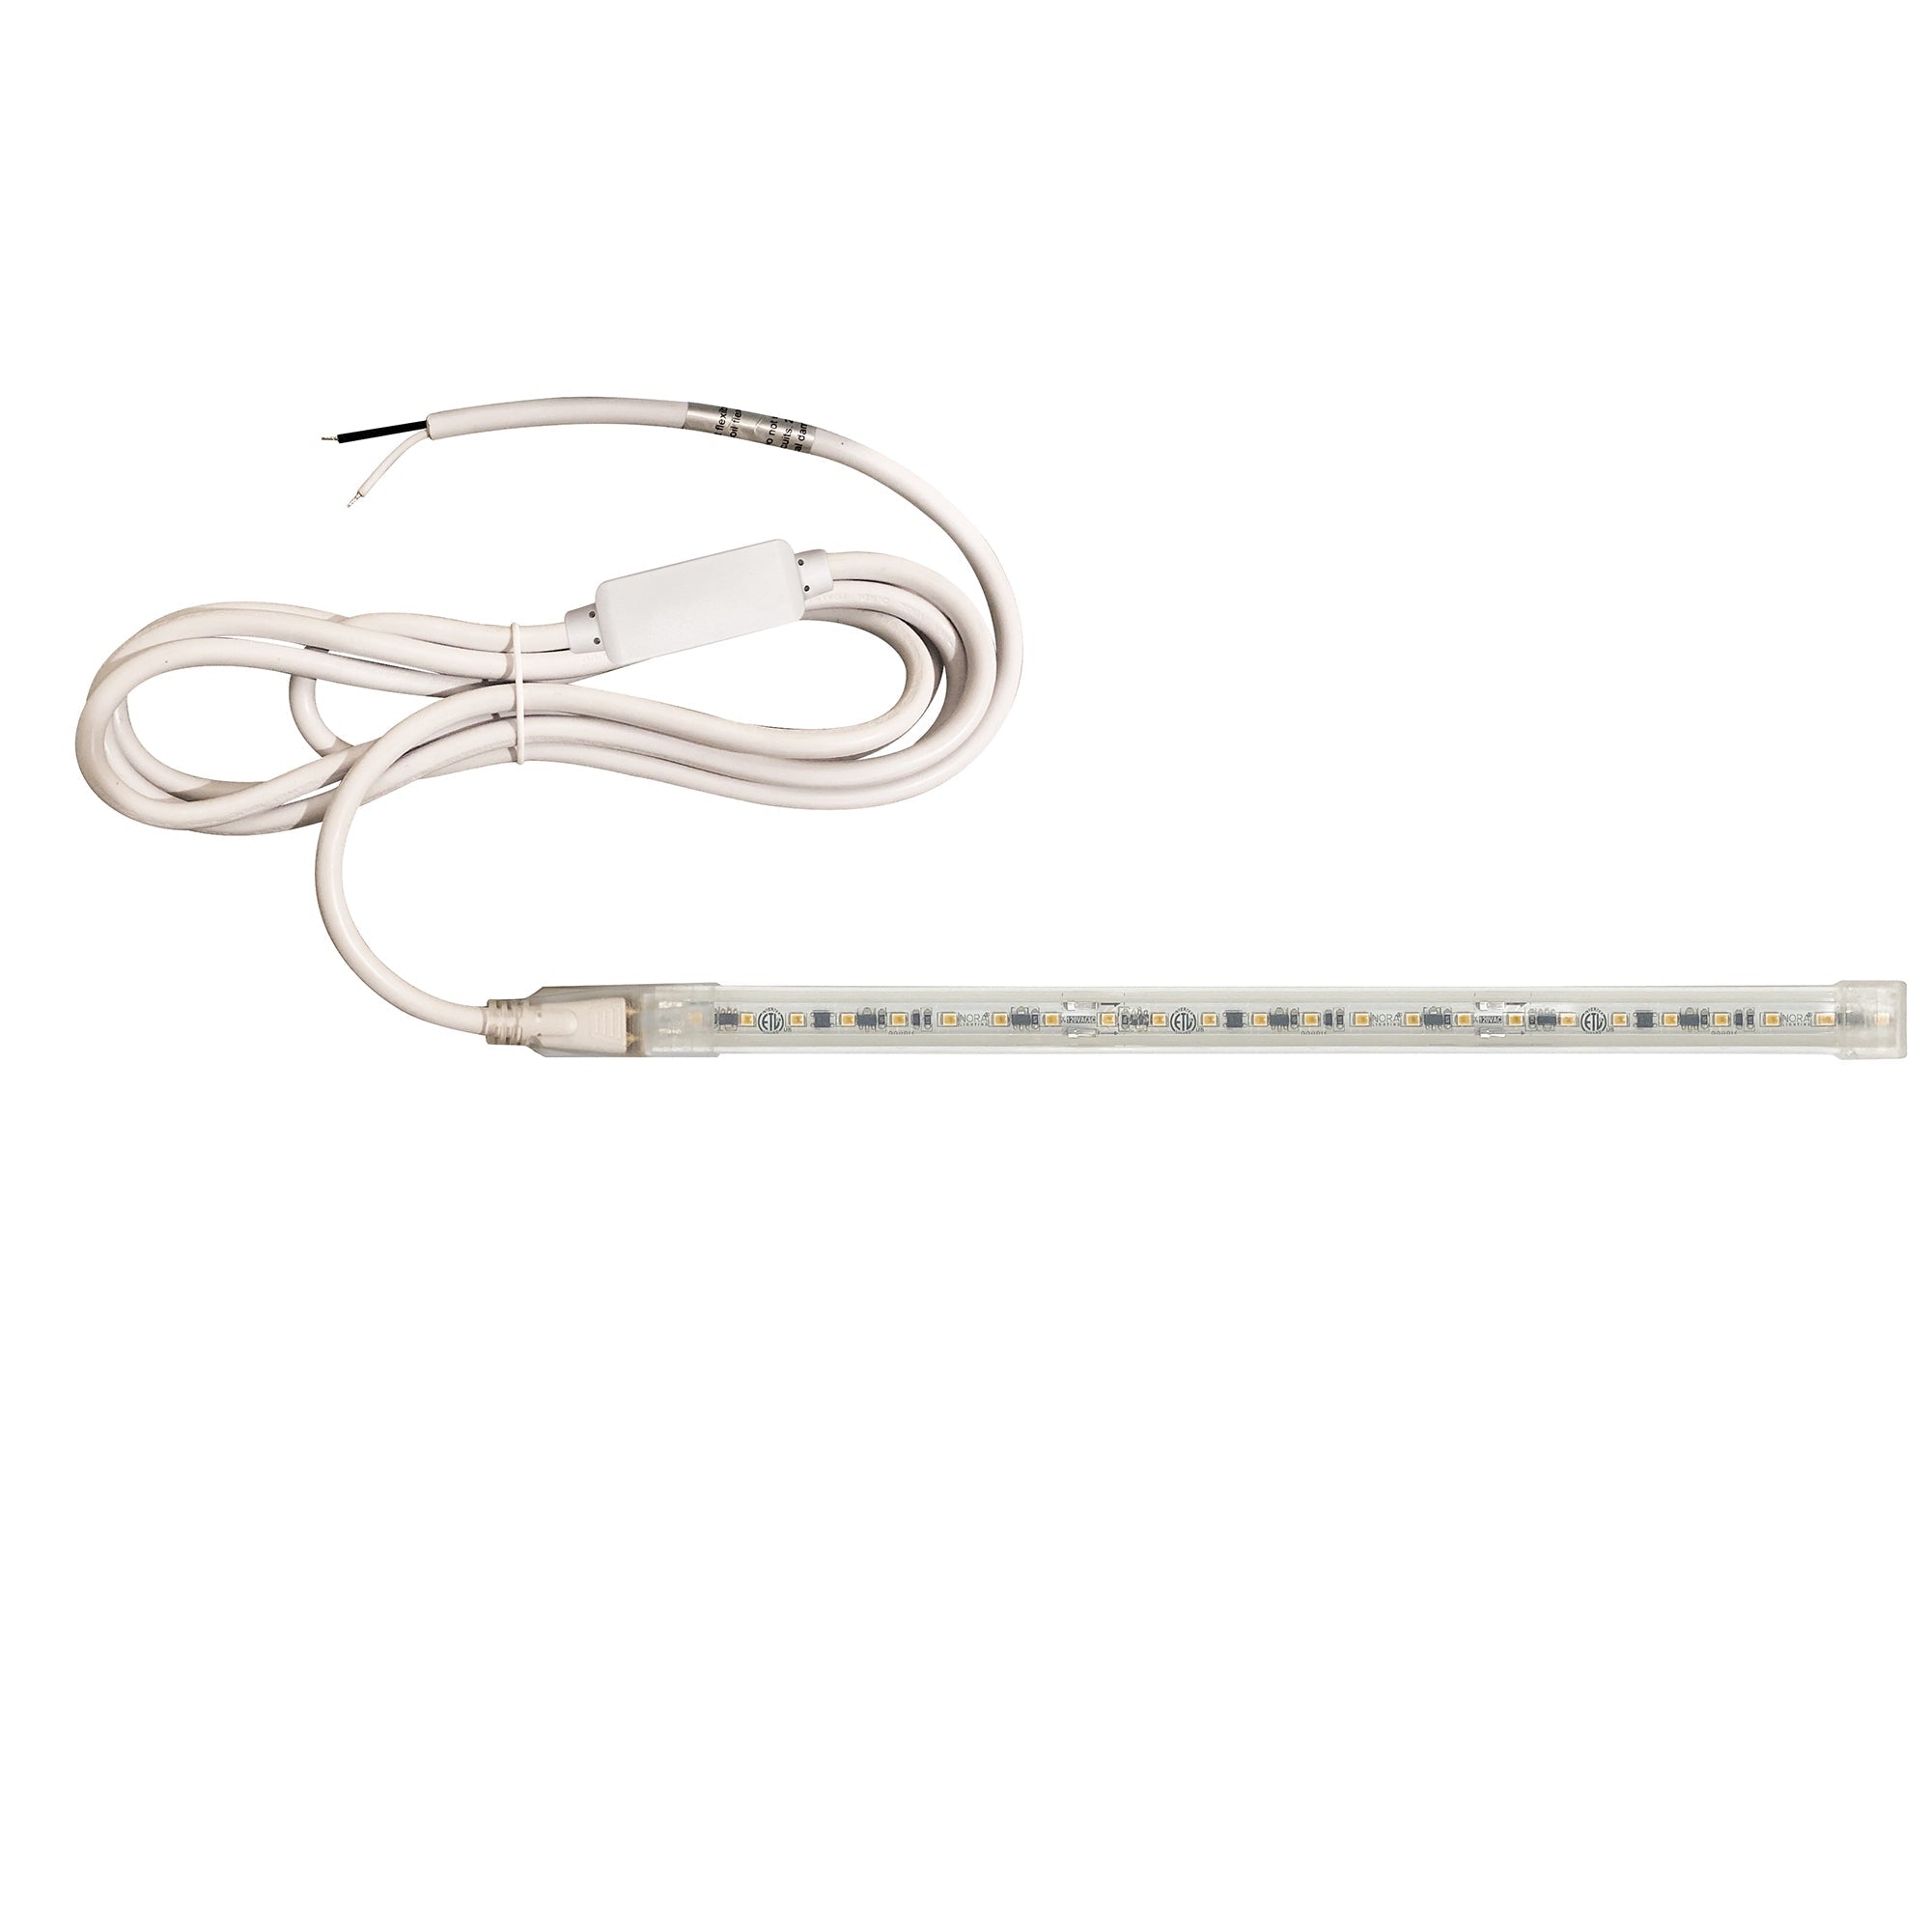 Nora Lighting NUTP13-W42-12-930/HWSP - Accent / Undercabinet - Custom Cut 42-ft 120V Continuous LED Tape Light, 330lm / 3.6W per foot, 3000K, w/ Mounting Clips and 8' Hardwired Power Cord w/ Surge Protector